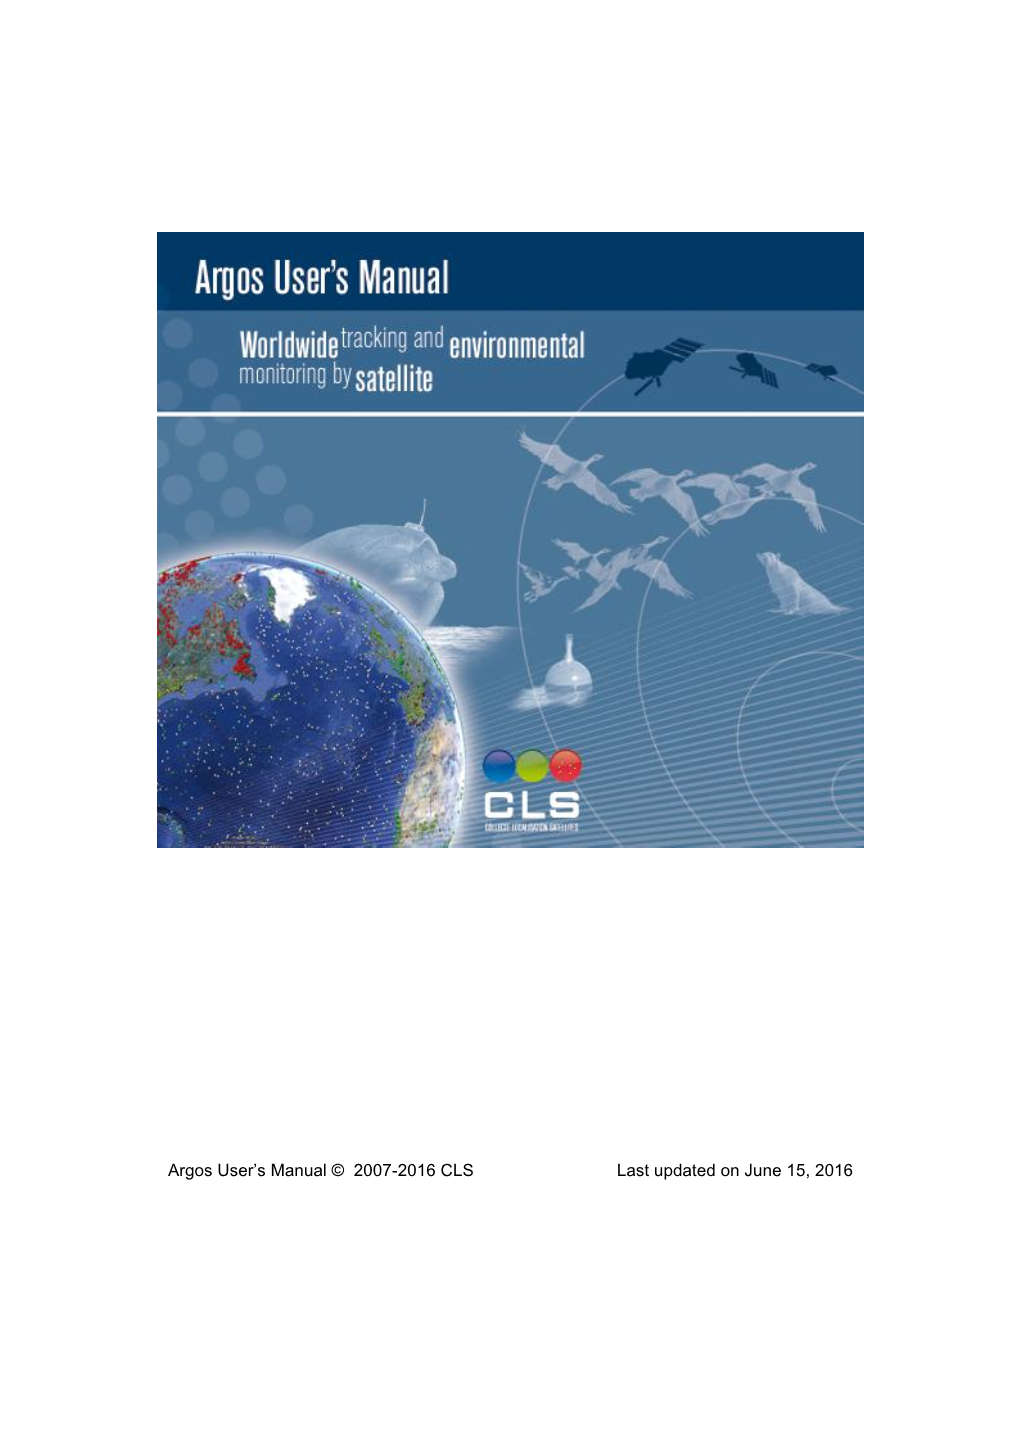 Argos User's Manual © 2007-2016 CLS Last Updated on June 15, 2016